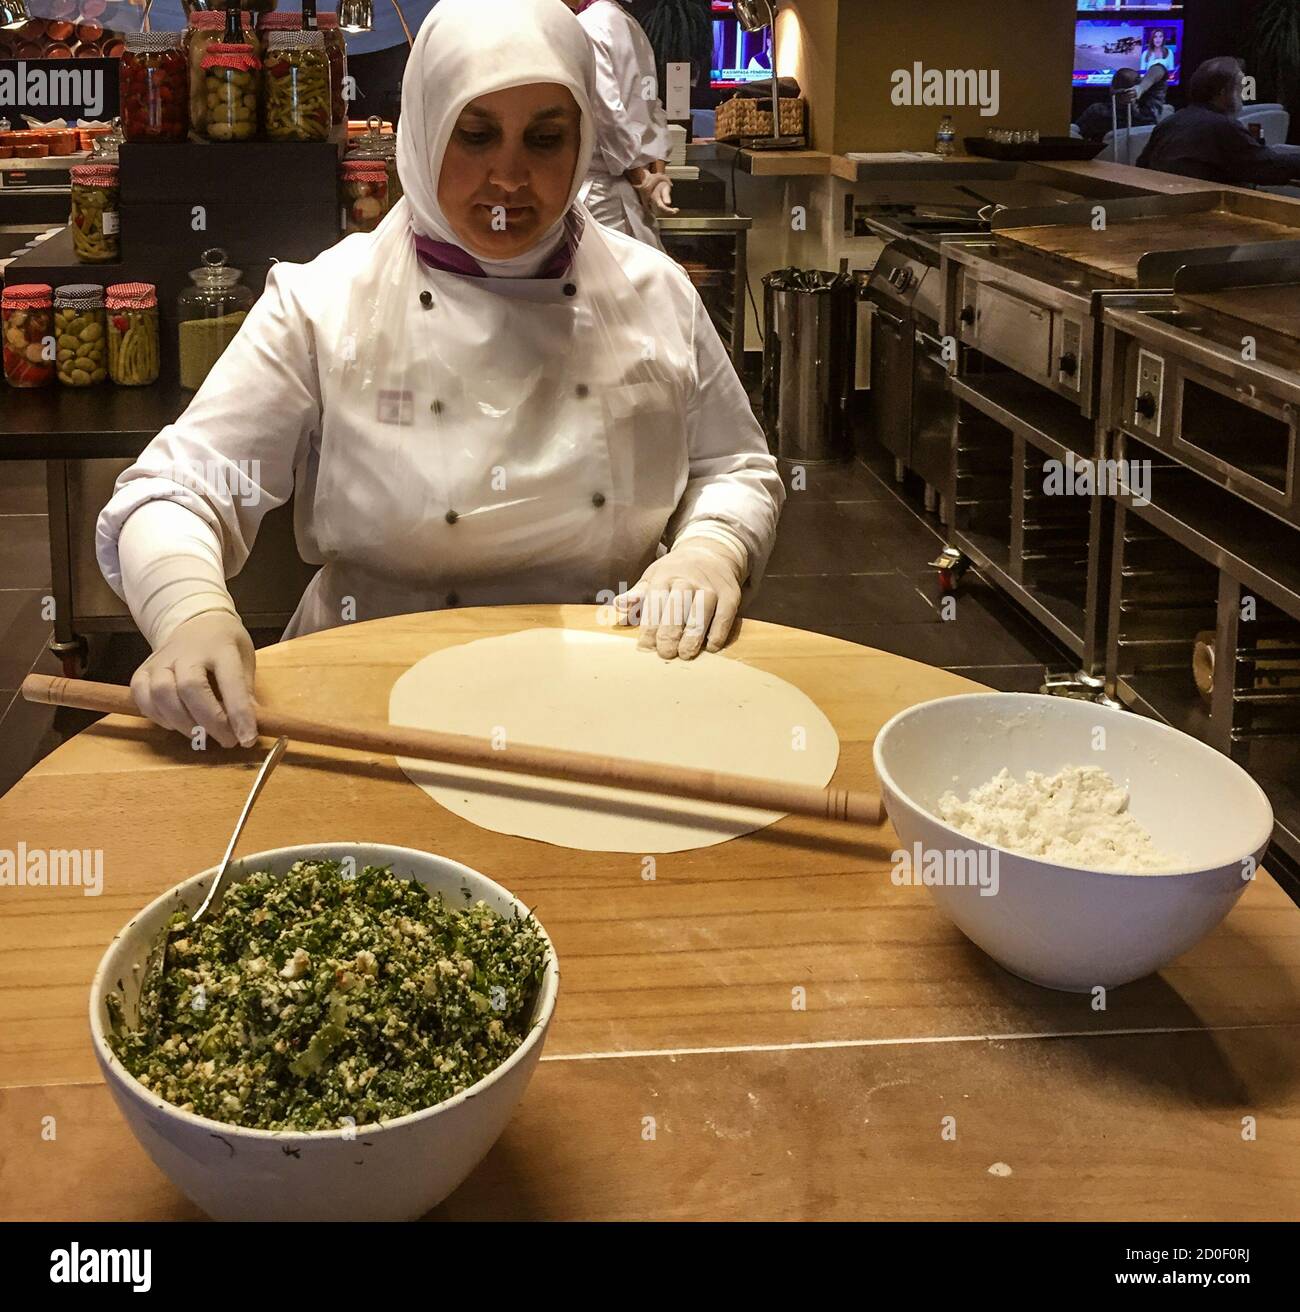 Istanbul, Turkey - 2019-05-04 - airport lounge woman makes snack starting with rolling out dough. Stock Photo